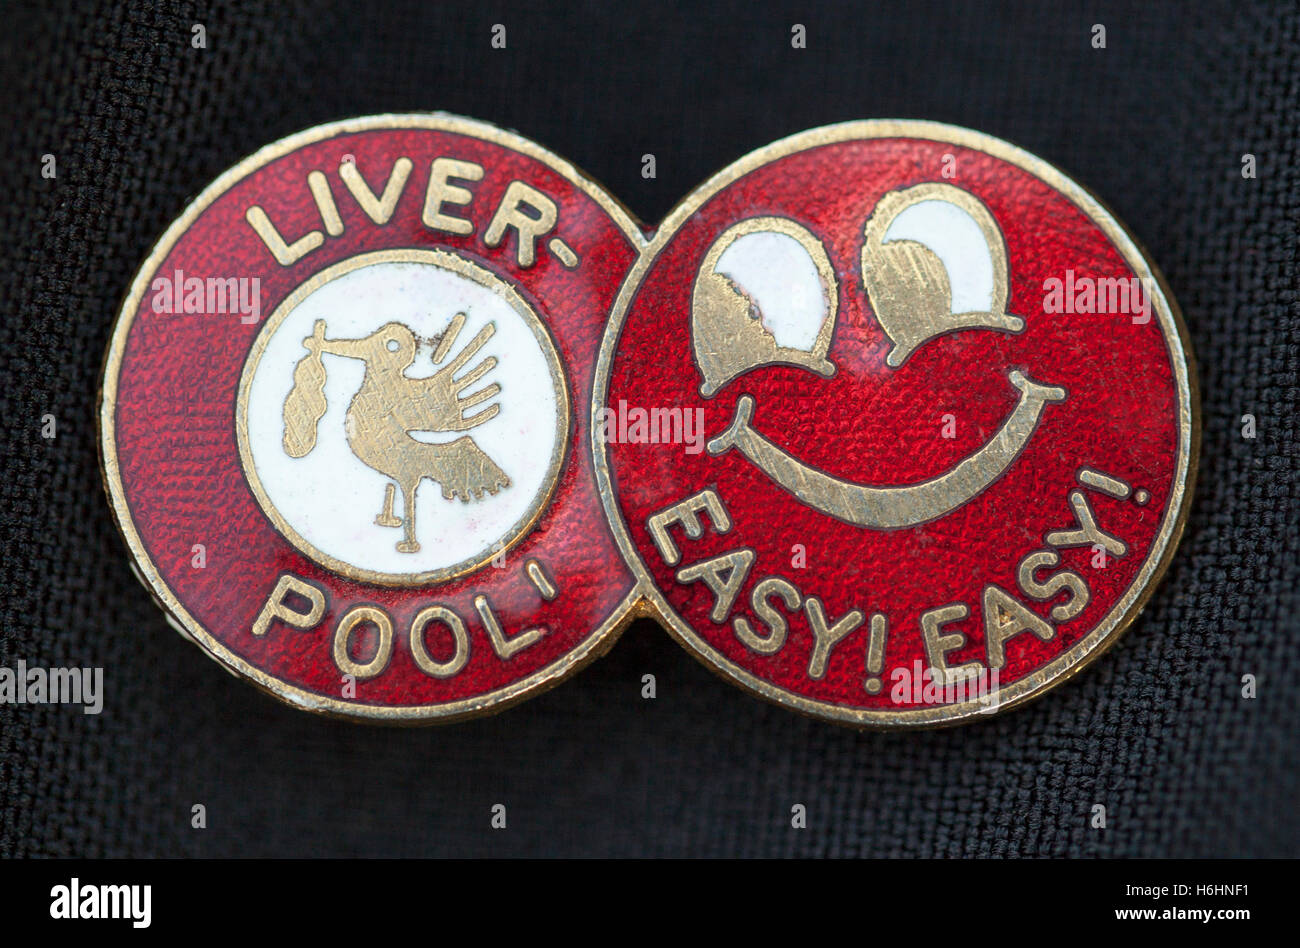 Liverpool No1 Red Top White Bottom Collectors Lapel Pin Badge Used 